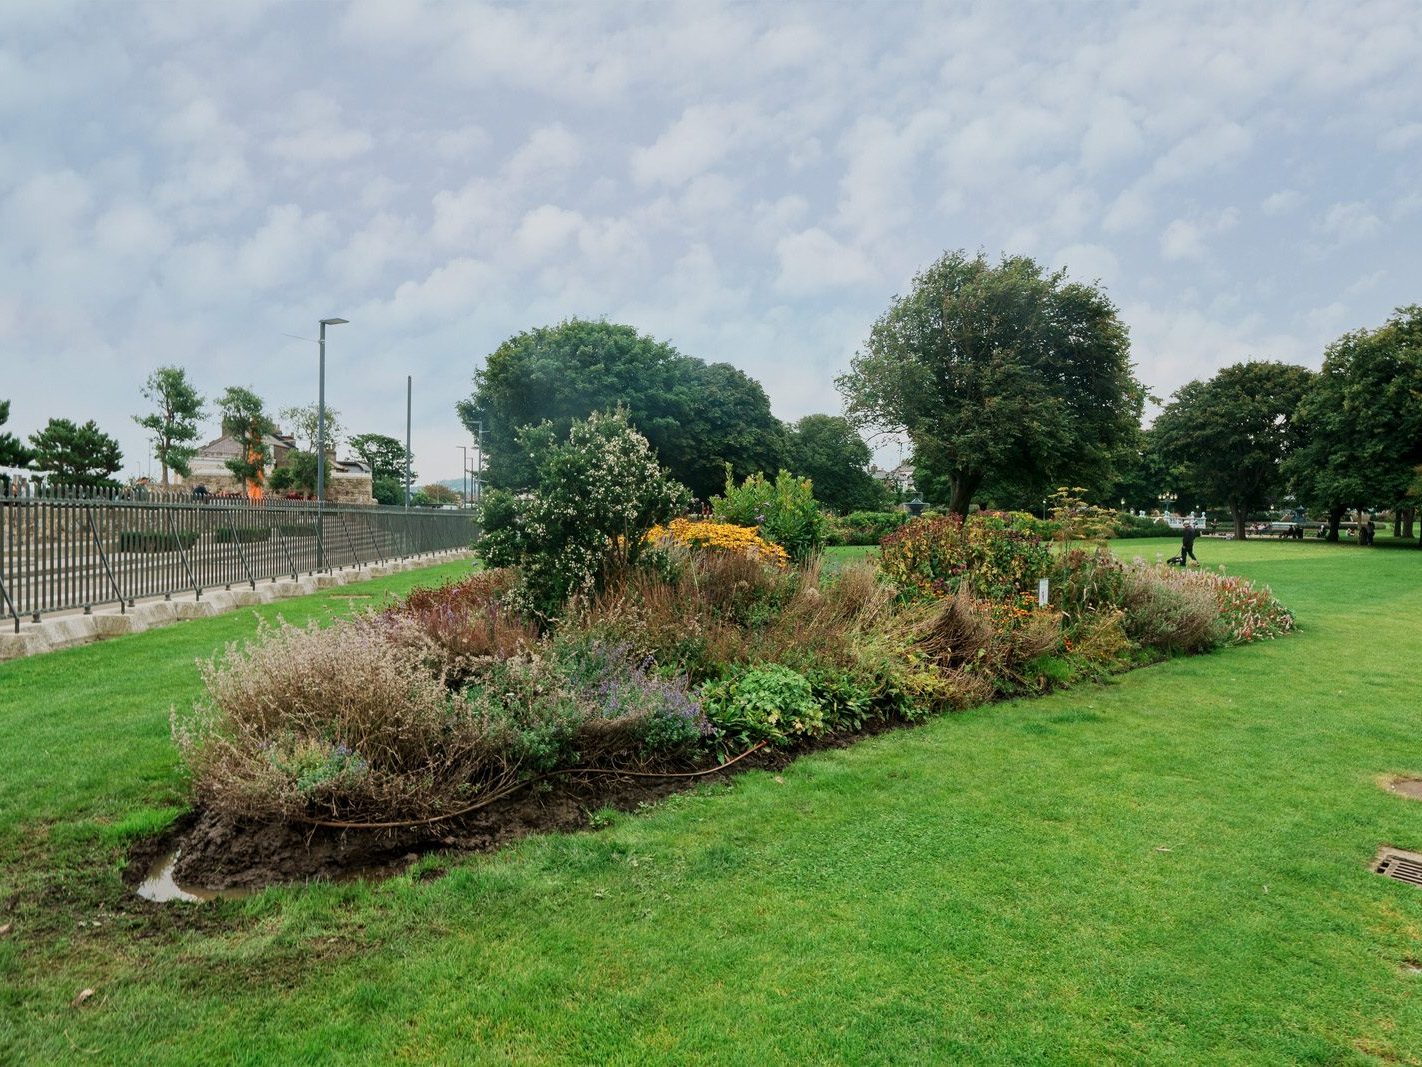 I REALLY LIKE THE PEOPLE'S PARK [AN ATTRACTIVE PUBLIC SPACE IN DUN LAOGHAIRE] 005